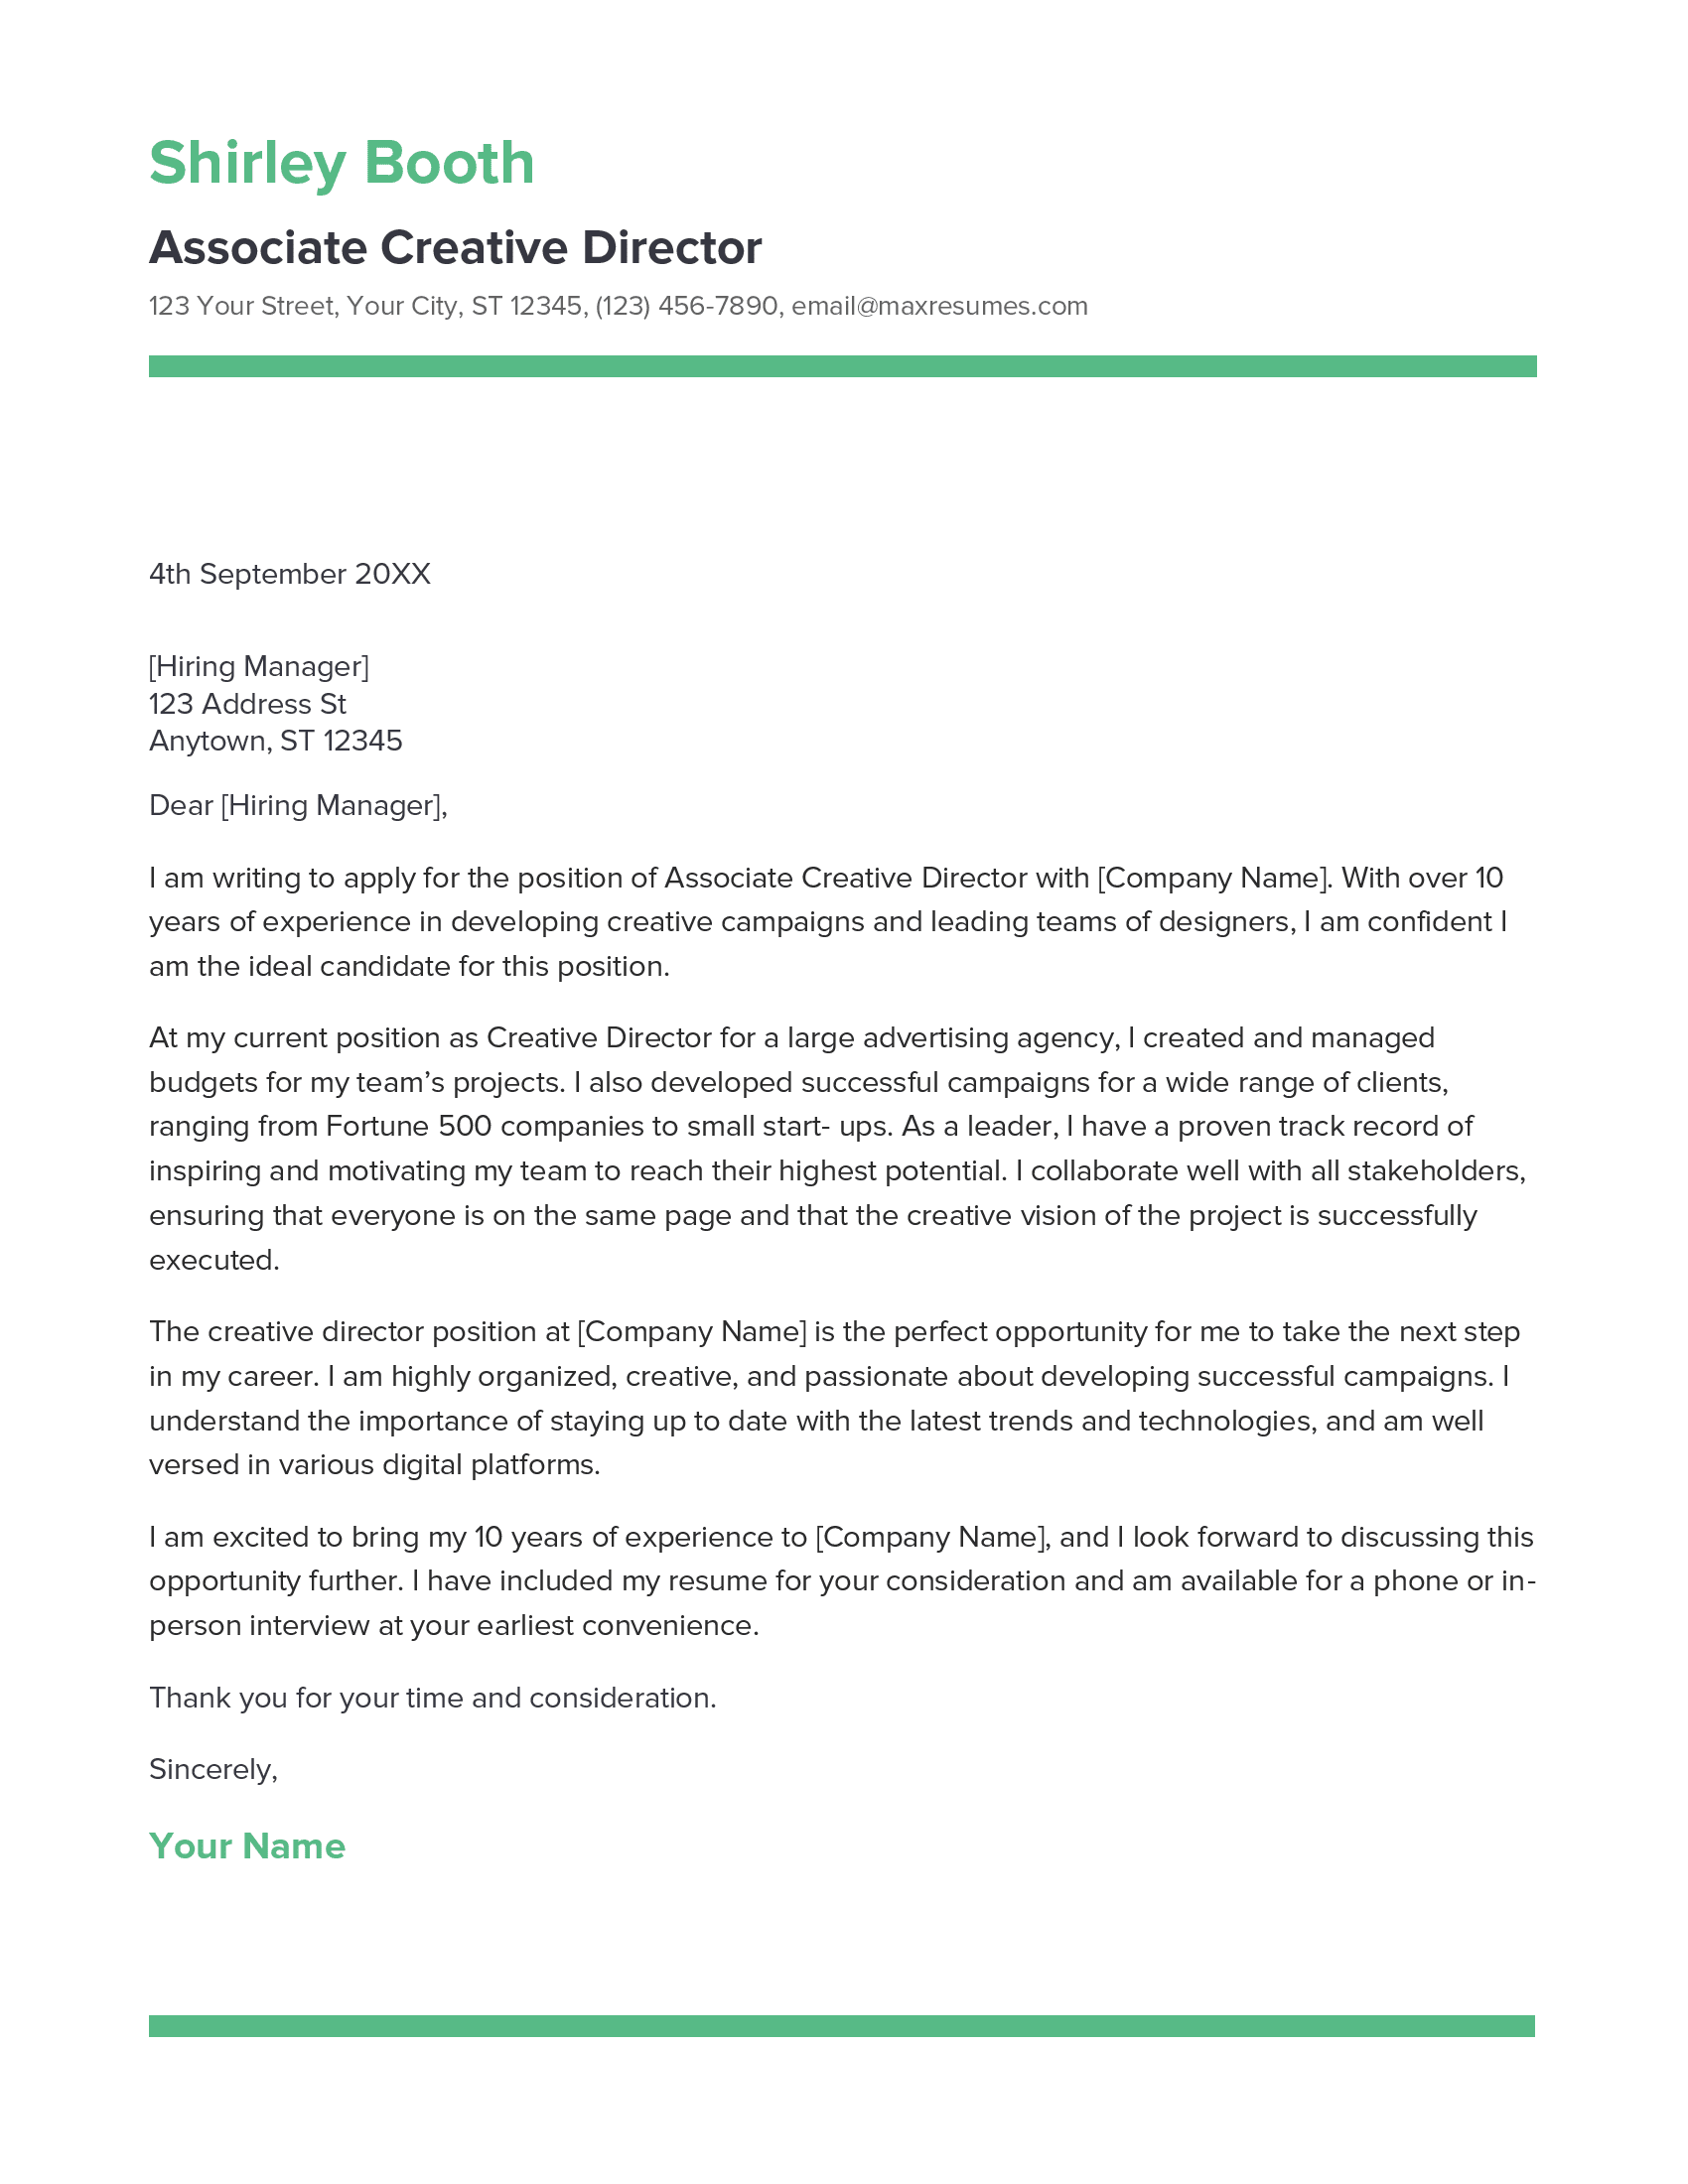 Associate Creative Director Cover Letter Example